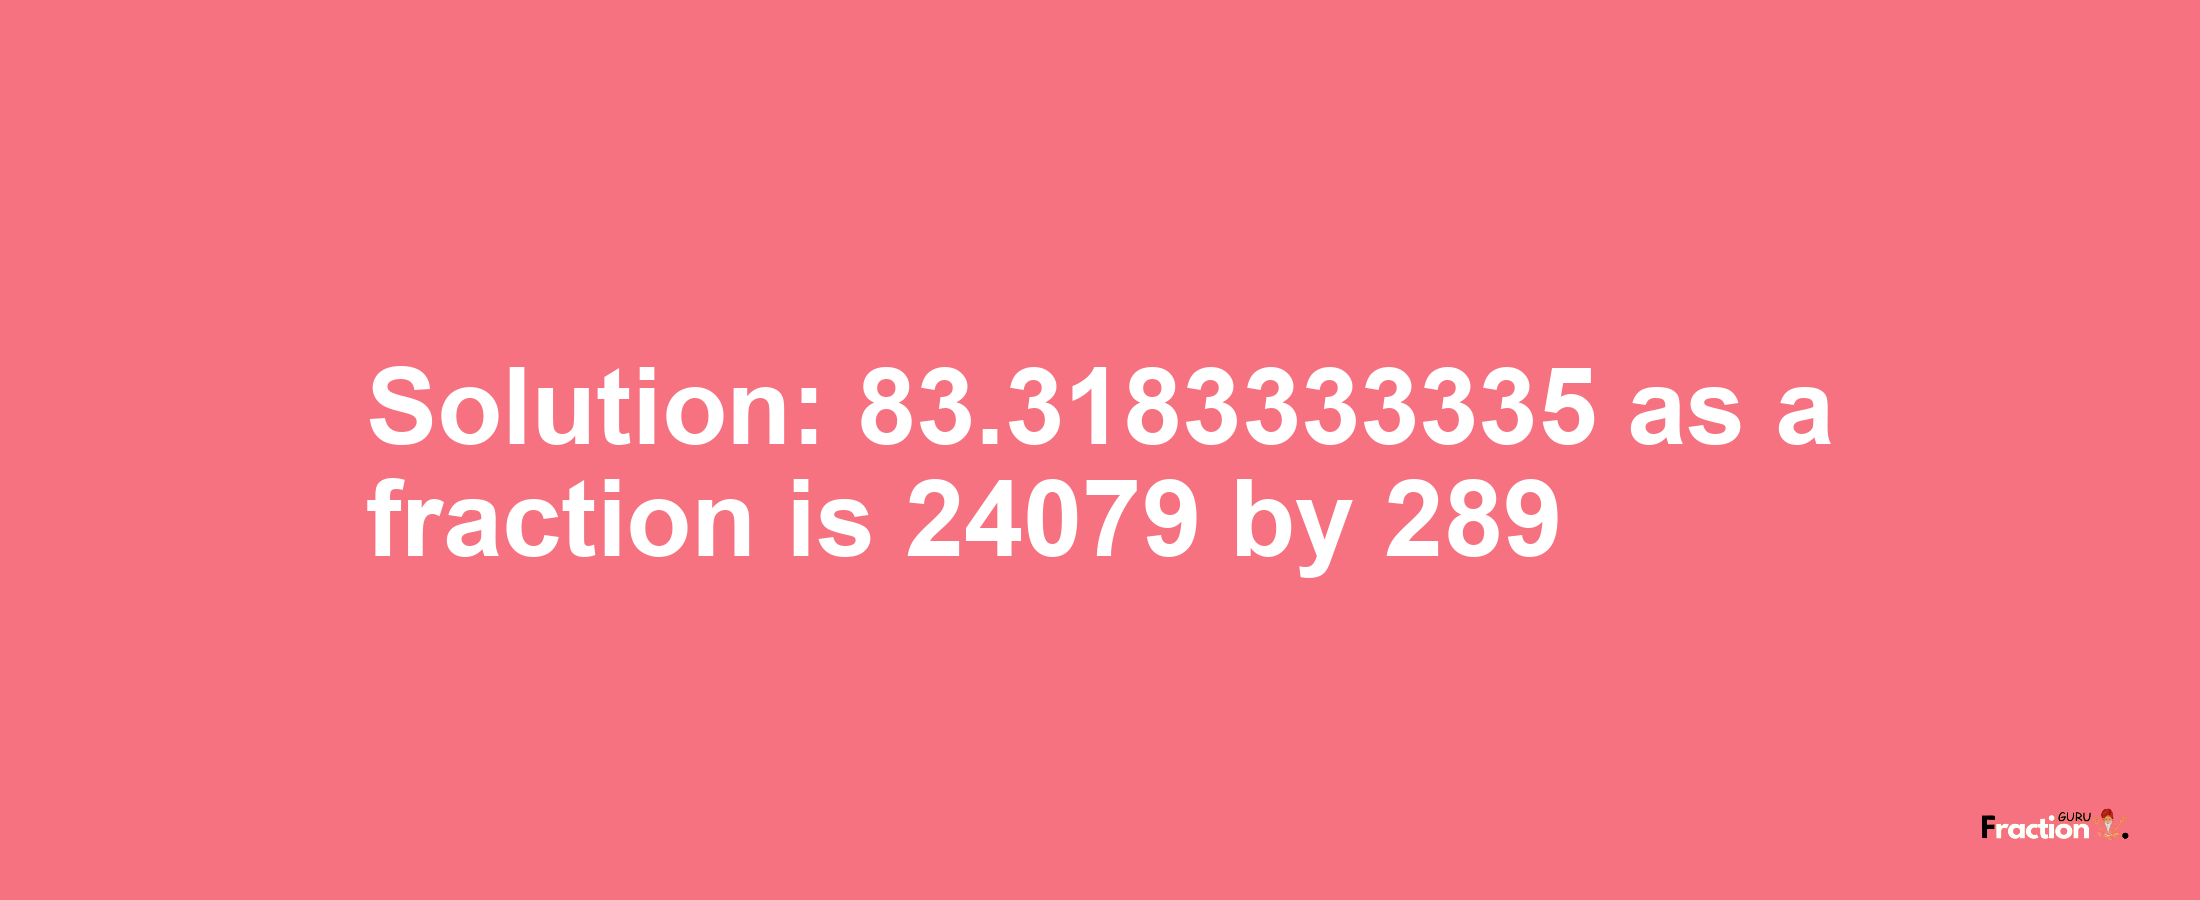 Solution:83.3183333335 as a fraction is 24079/289